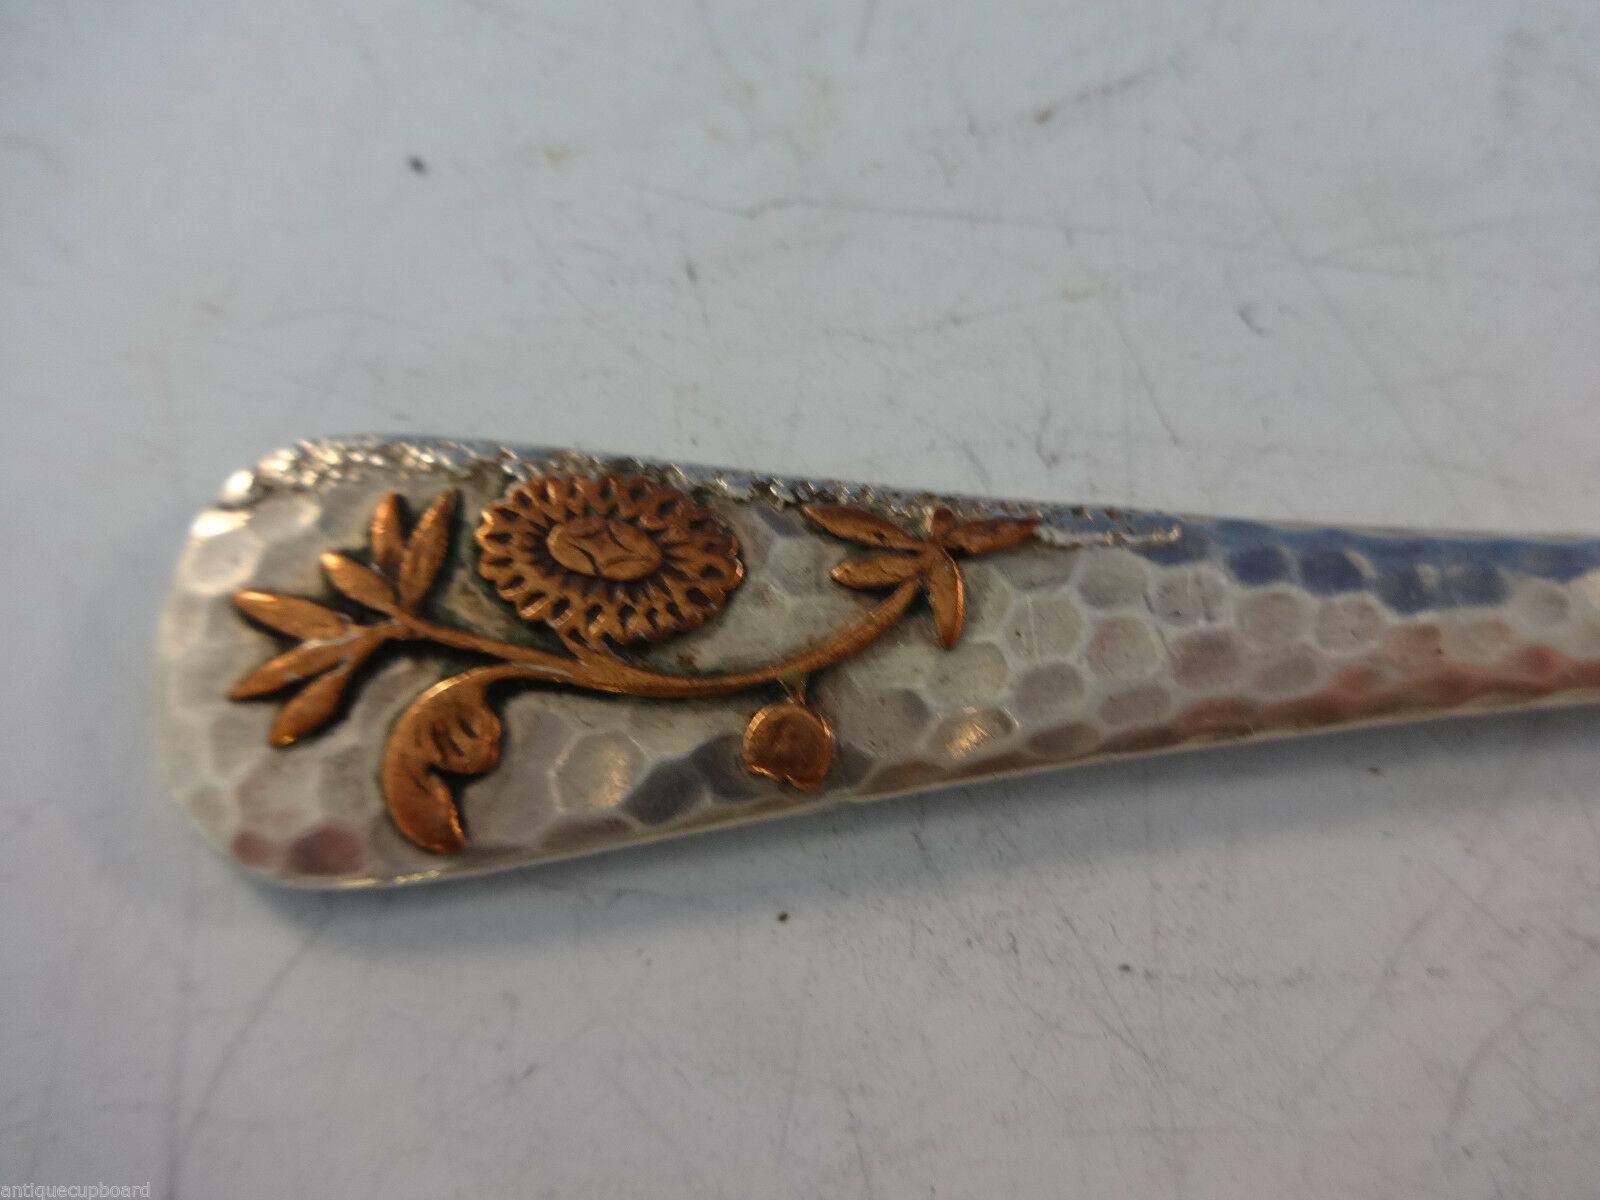 Gorham

Sterling silver 

Gorham mixed metal citrus knife, hand-hammered sterling with applied copper flower and applied silver grains of sand, measures 7 1/4” desirable mark “& other metals” circa 1880s. It is not monogrammed and is in